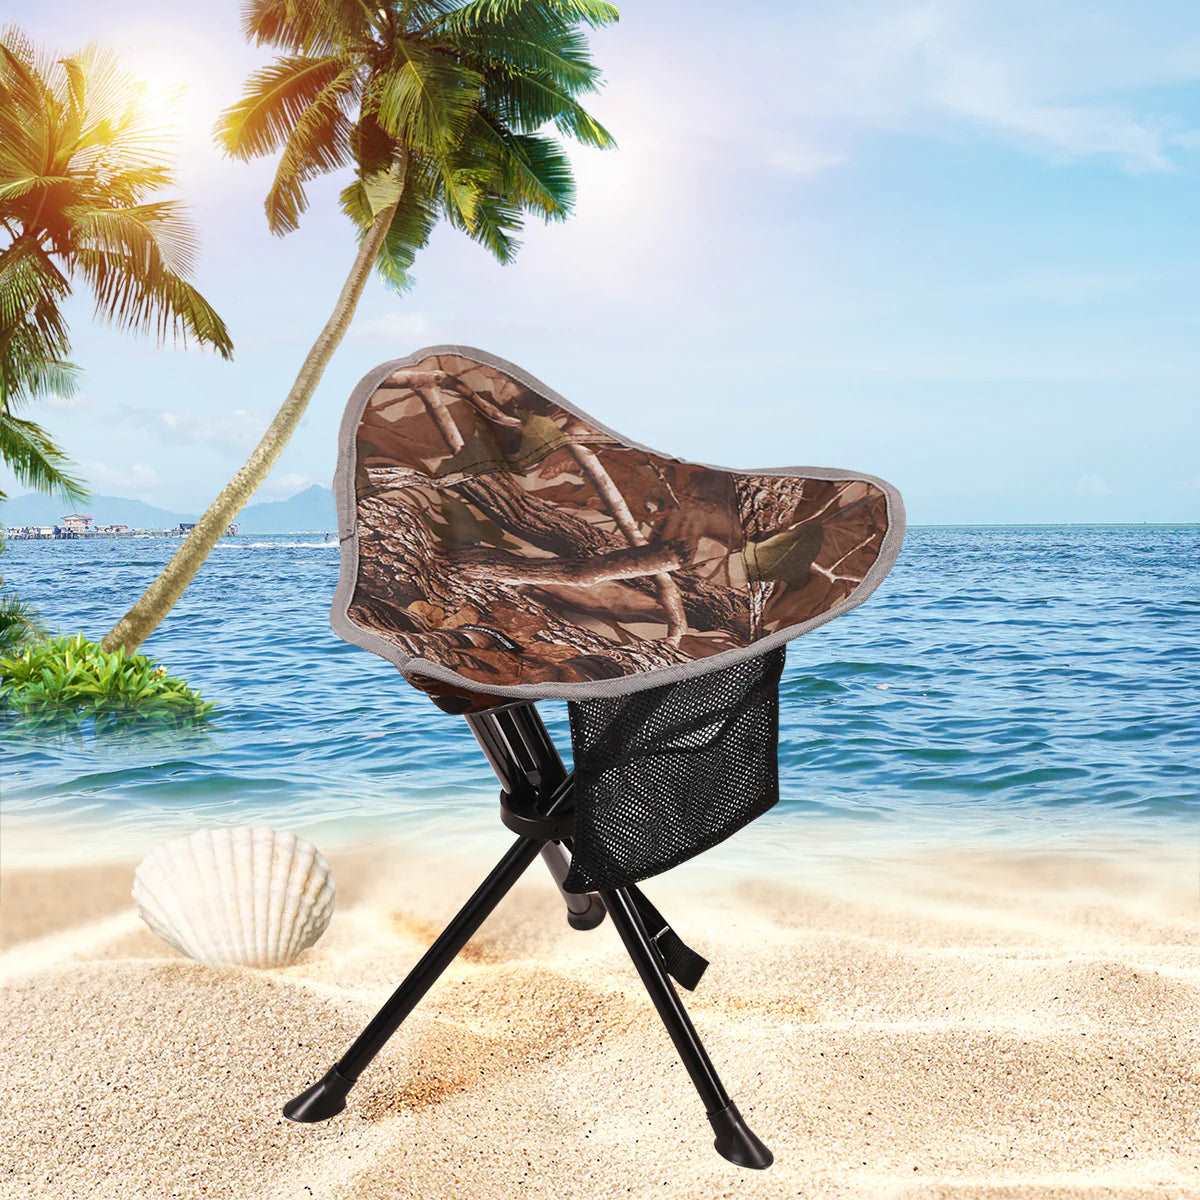 Buy REDCAMP2 Pack Tripod Hunting Chairs for Blinds, Portable